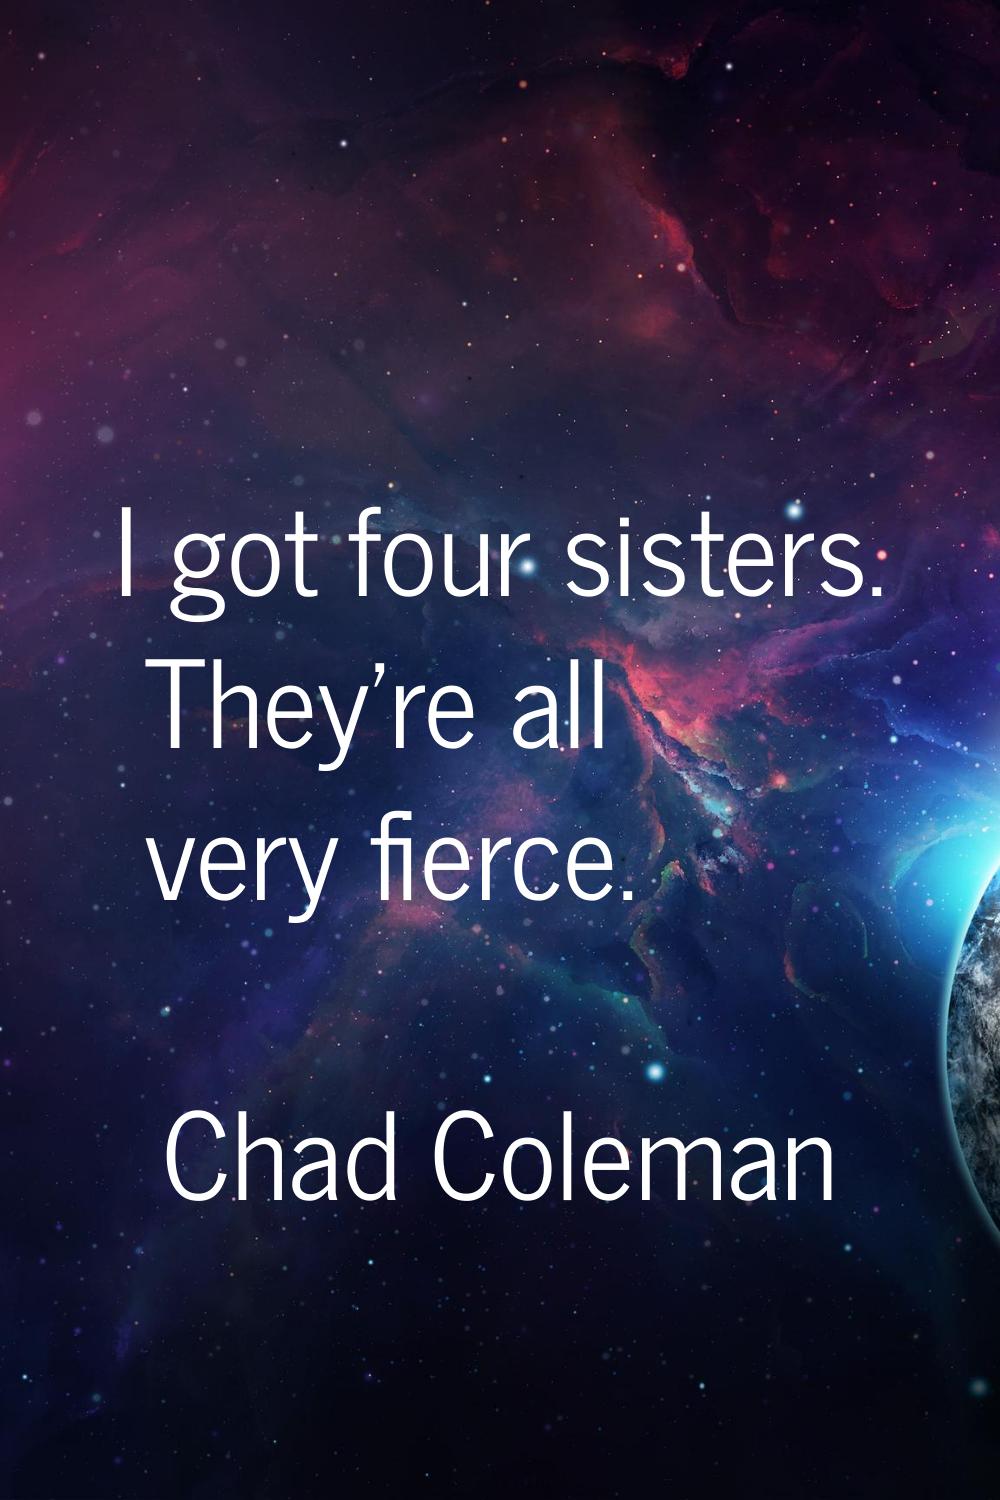 I got four sisters. They're all very fierce.